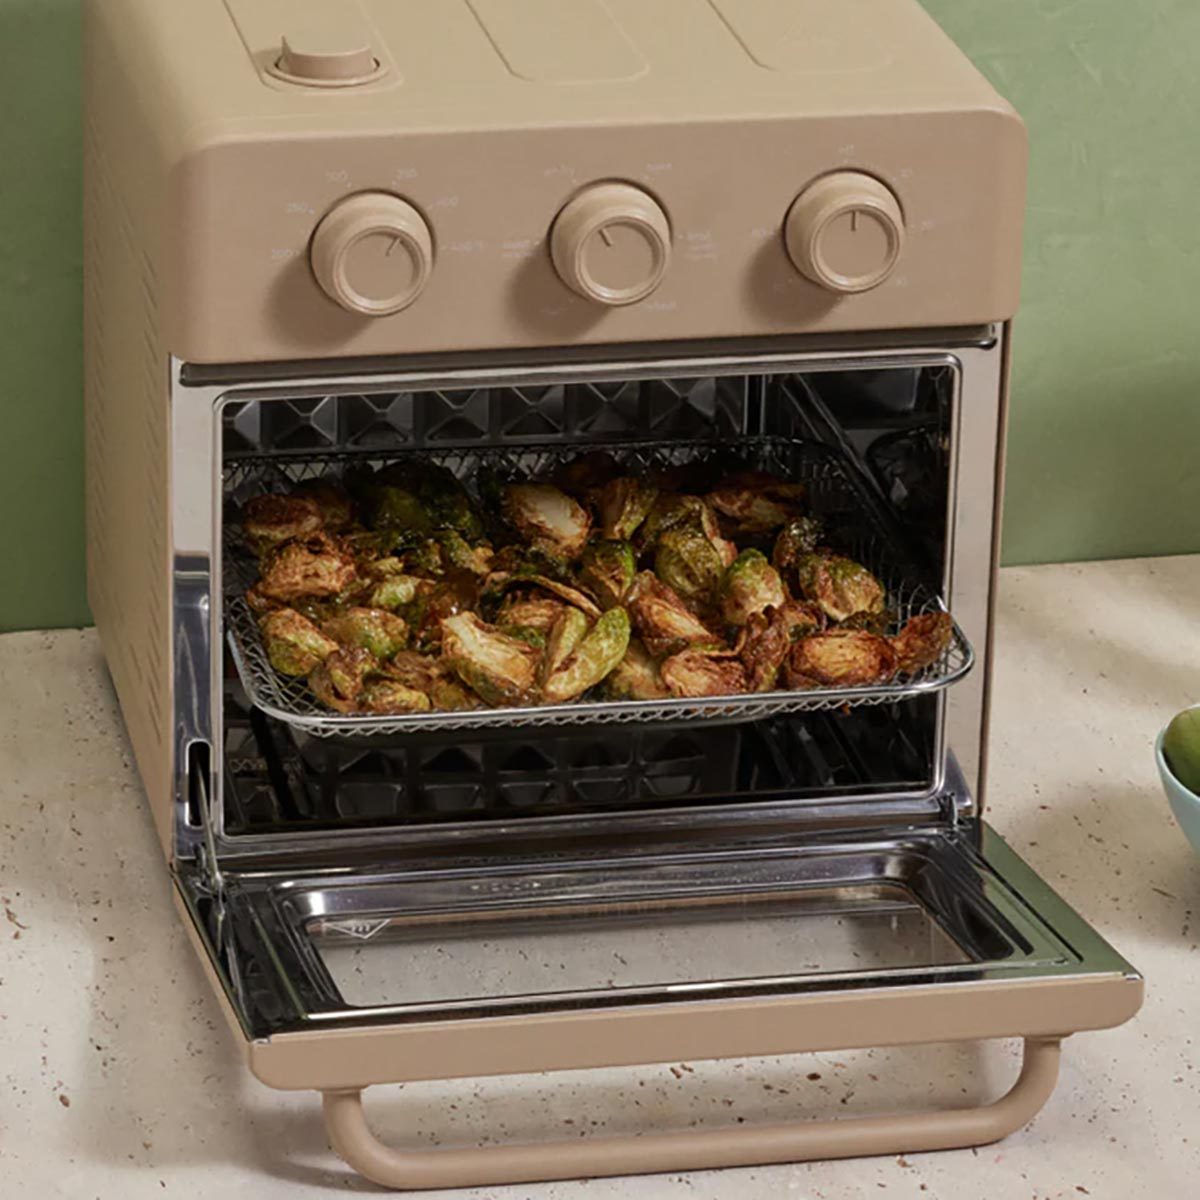 Check out this all in one air-fryer, microwave, and convection